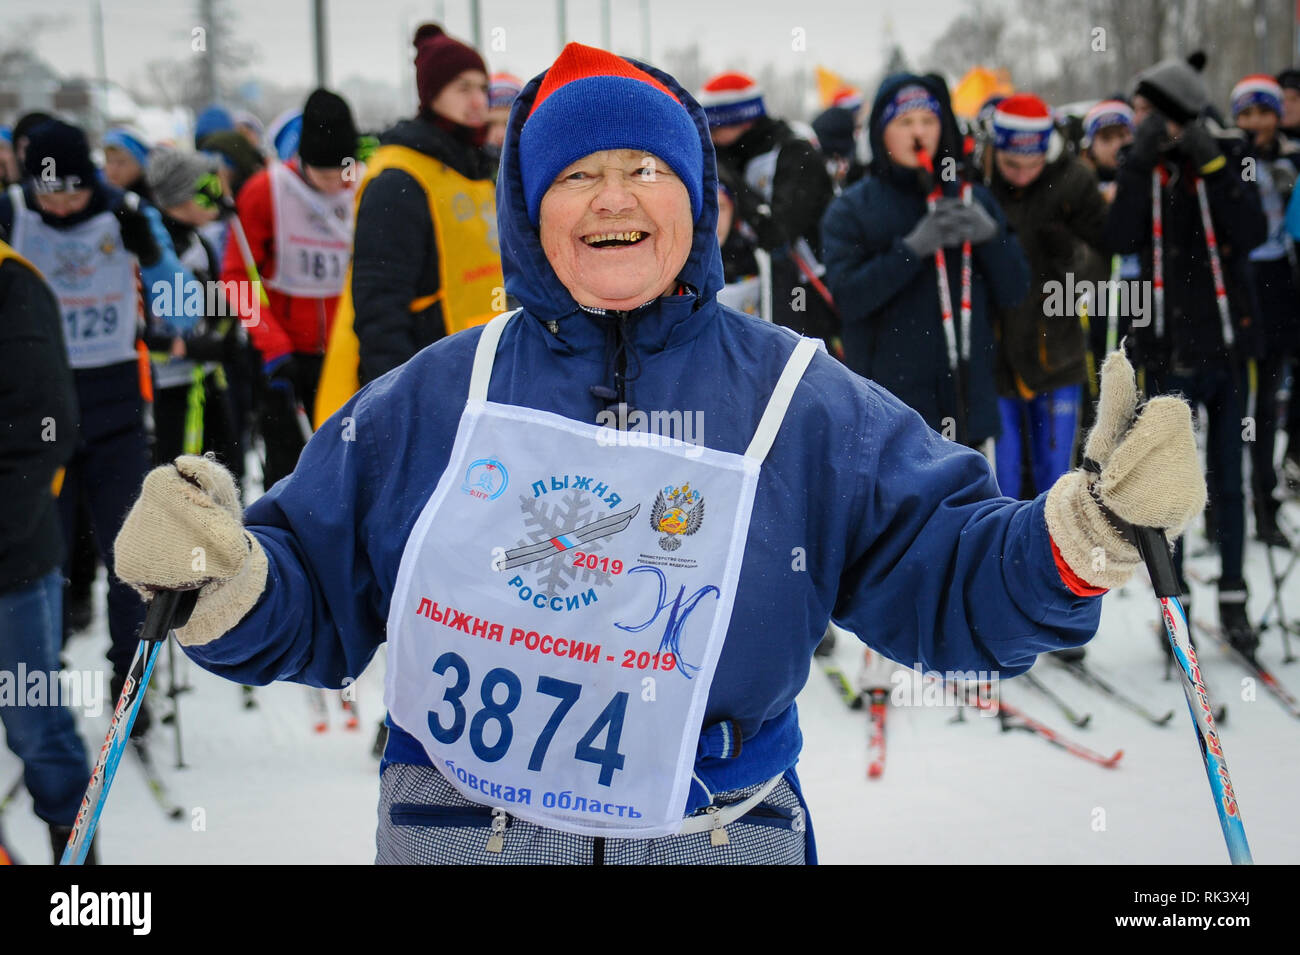 Tambov, Tambov region, Russia. 9th Feb, 2019. February 9, 2019, in the Park '' Friendship ''Tambov (Russia), held XXXVII all-Russian ski race''Ski track of Russia''. It was attended by about 6,000 residents of the Tambov region. The youngest participant was three years and six months old, and the oldest was over 80 years old. In the photo - Participant of the all-Russian ski race ''Ski track of Russia'' Tatiana Bezrukova (category 75-79 years) before the start Credit: Demian Stringer/ZUMA Wire/Alamy Live News Stock Photo